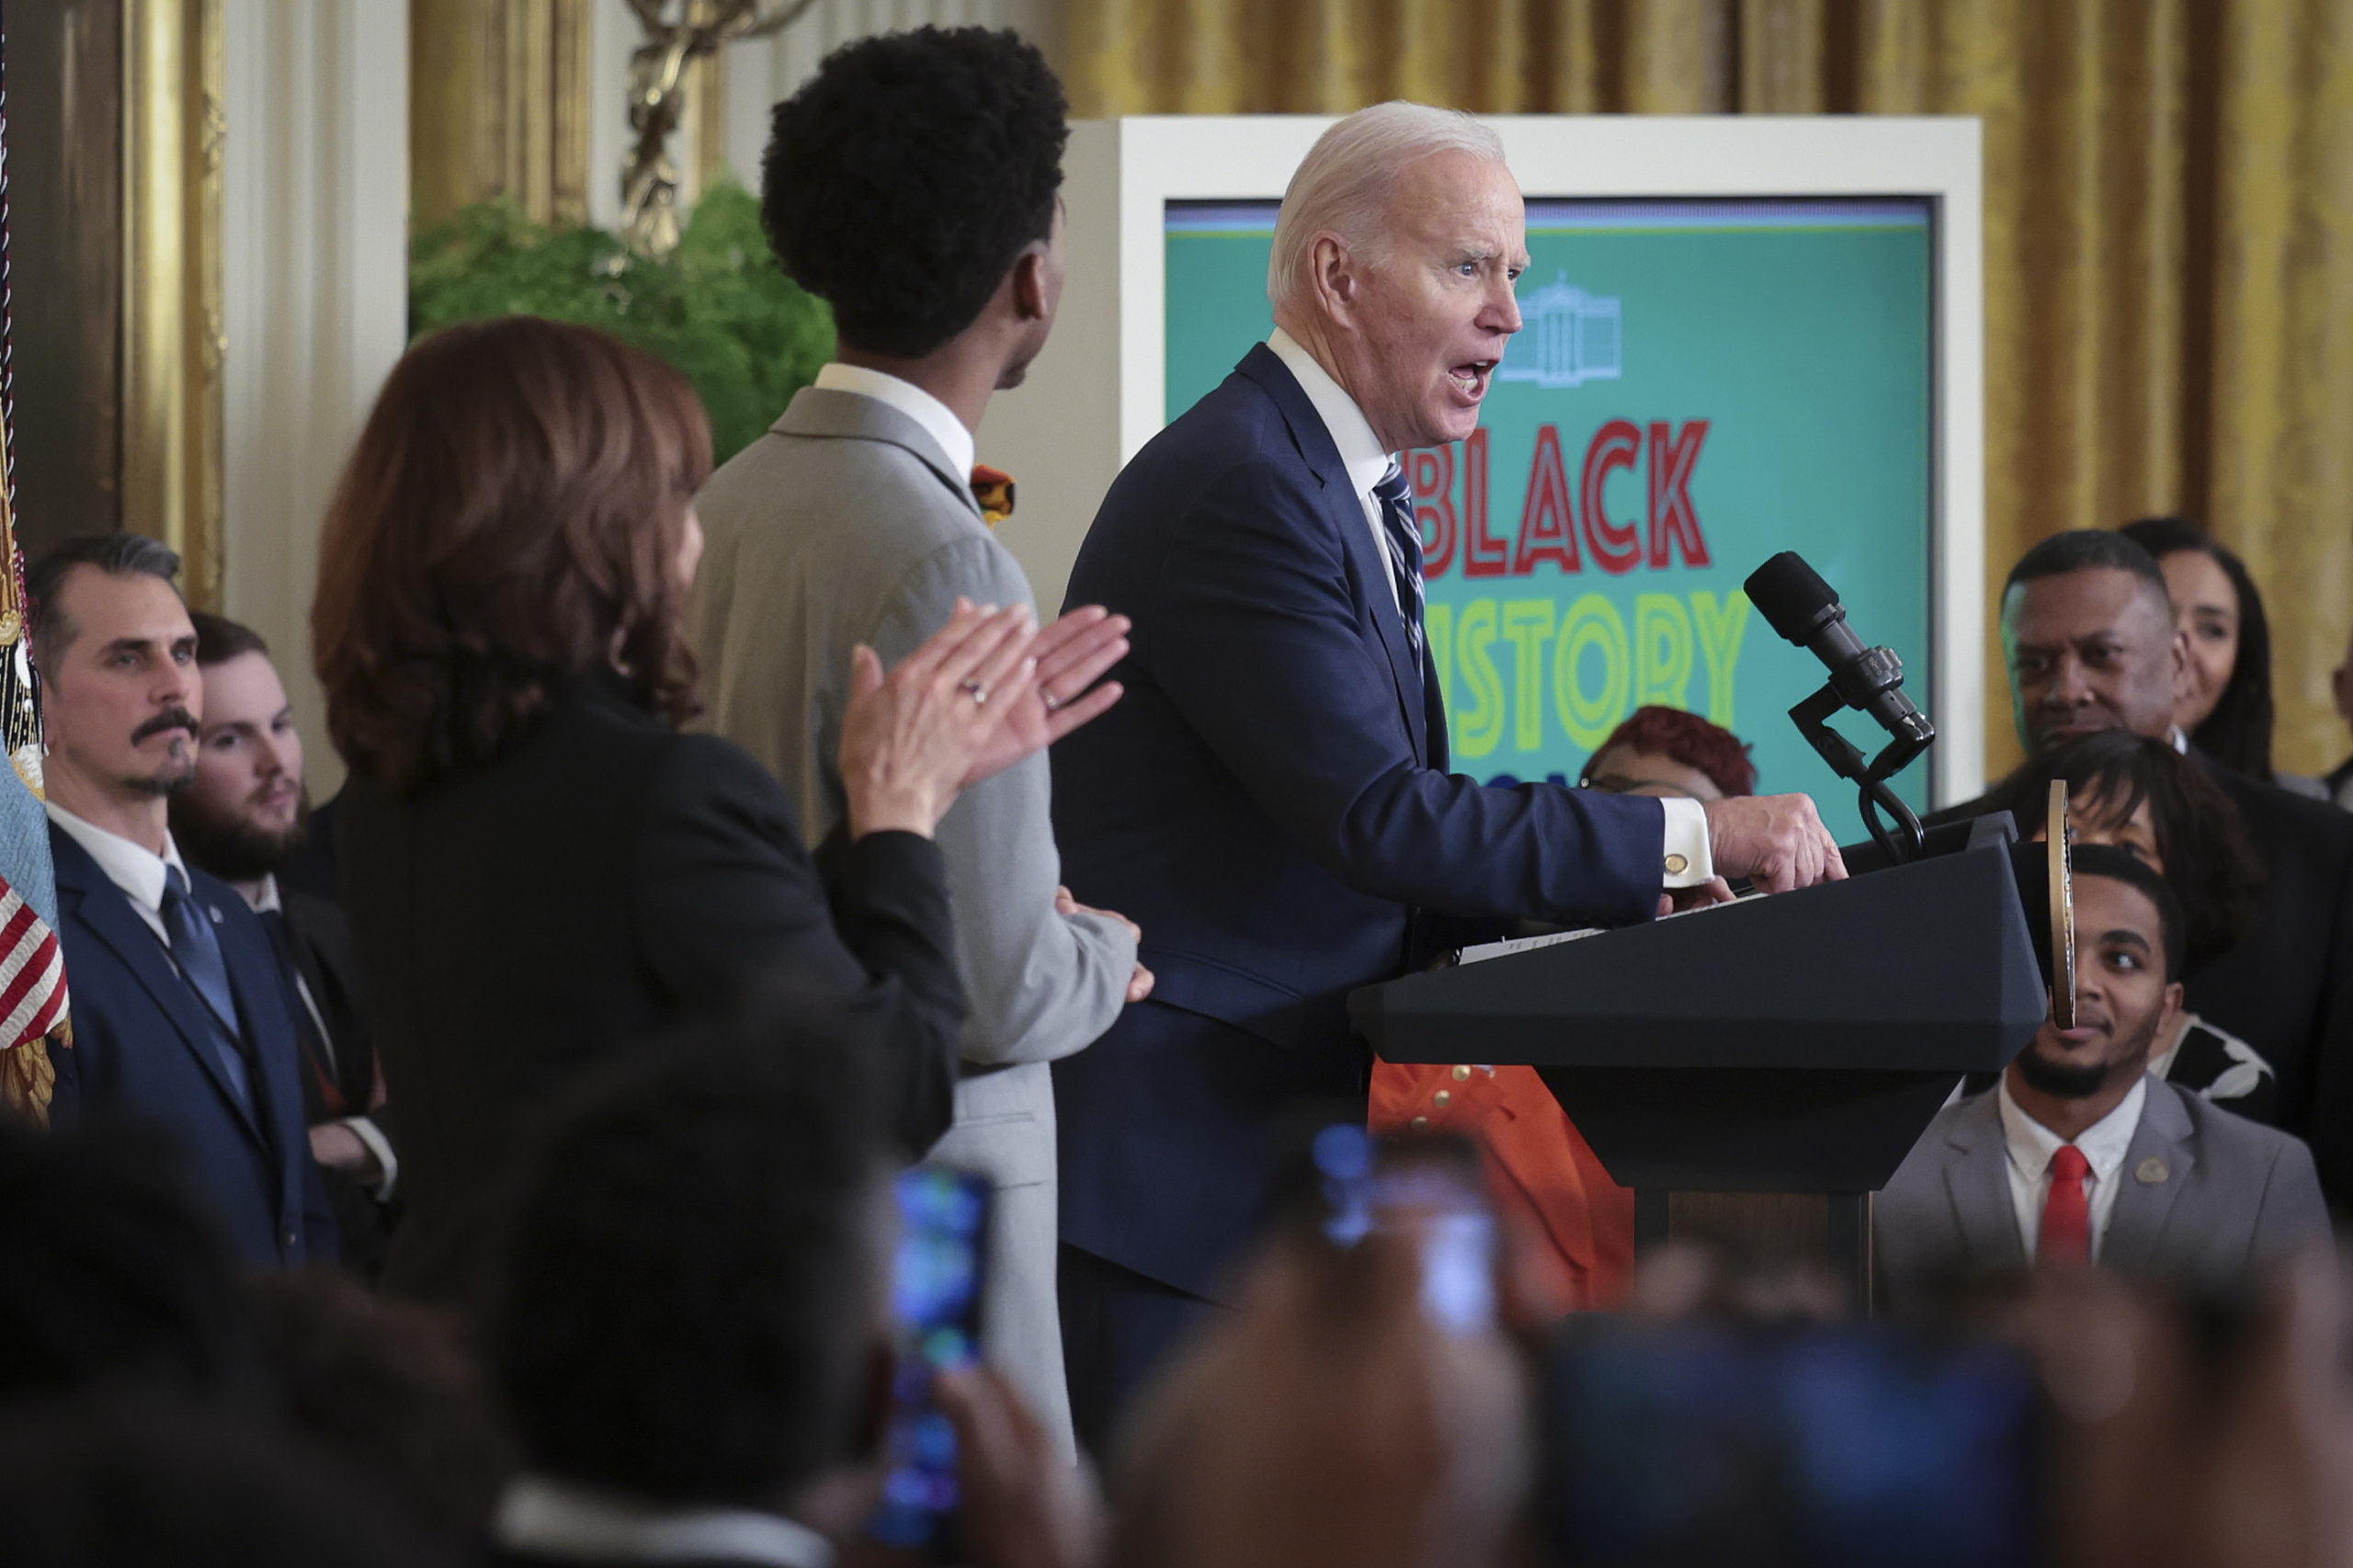 U.S. President Joe Biden speaks during an event in the East Room of the White House marking Black History Month February 27, 2023 in Washington, DC. Black History Month honors the varied contributions of African Americans throughout U.S. history. (Photo by Win McNamee/Getty Images)